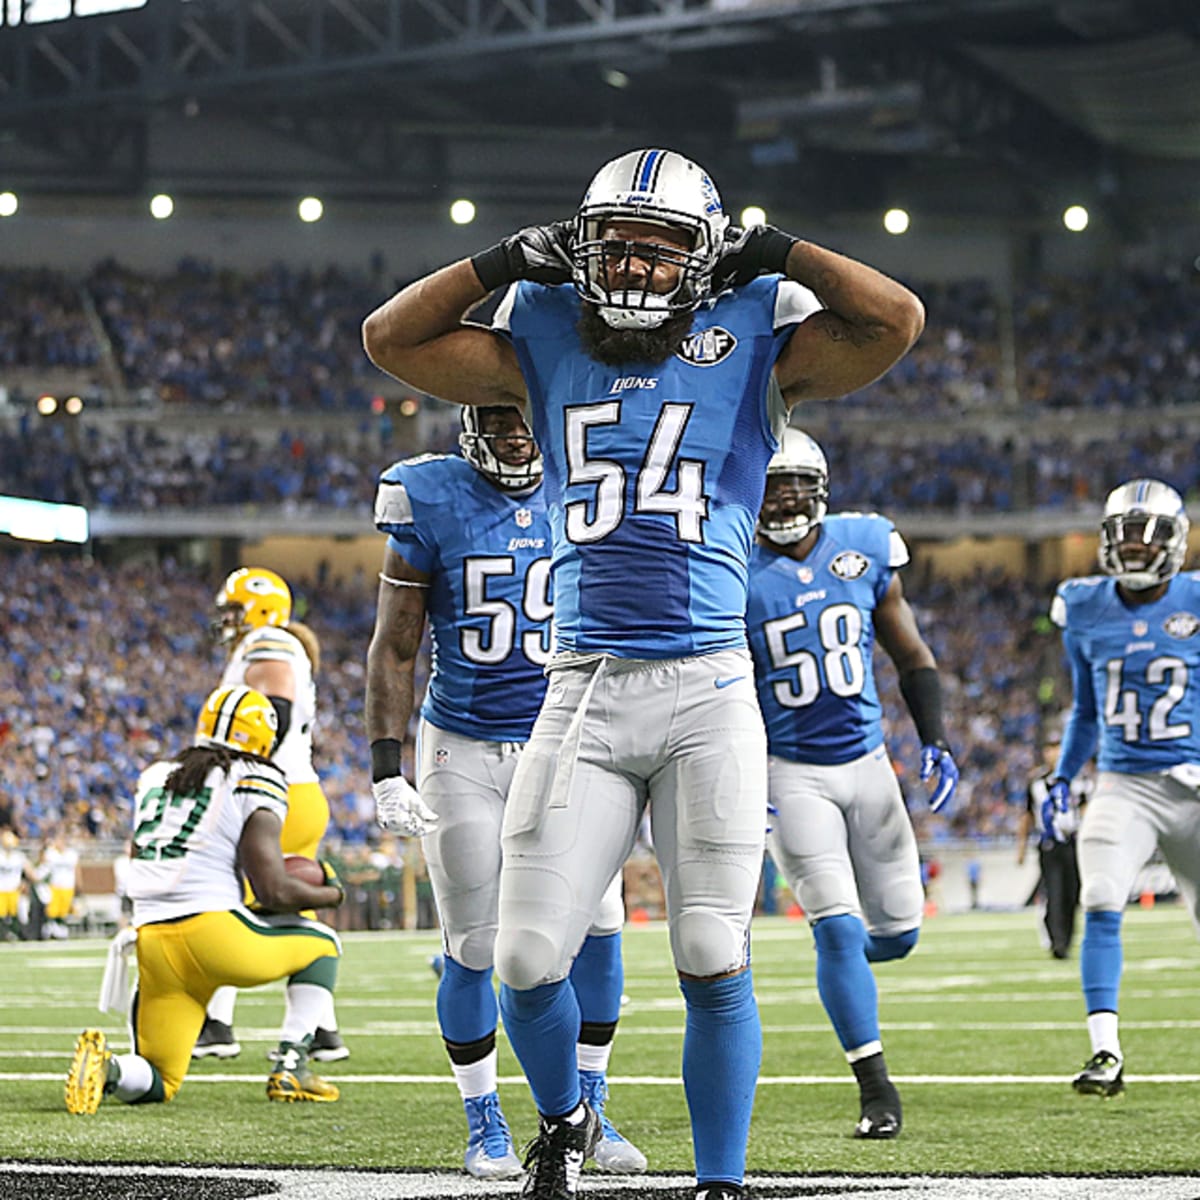 Report: Lions' DeAndre Levy out against Chargers, has 'possible